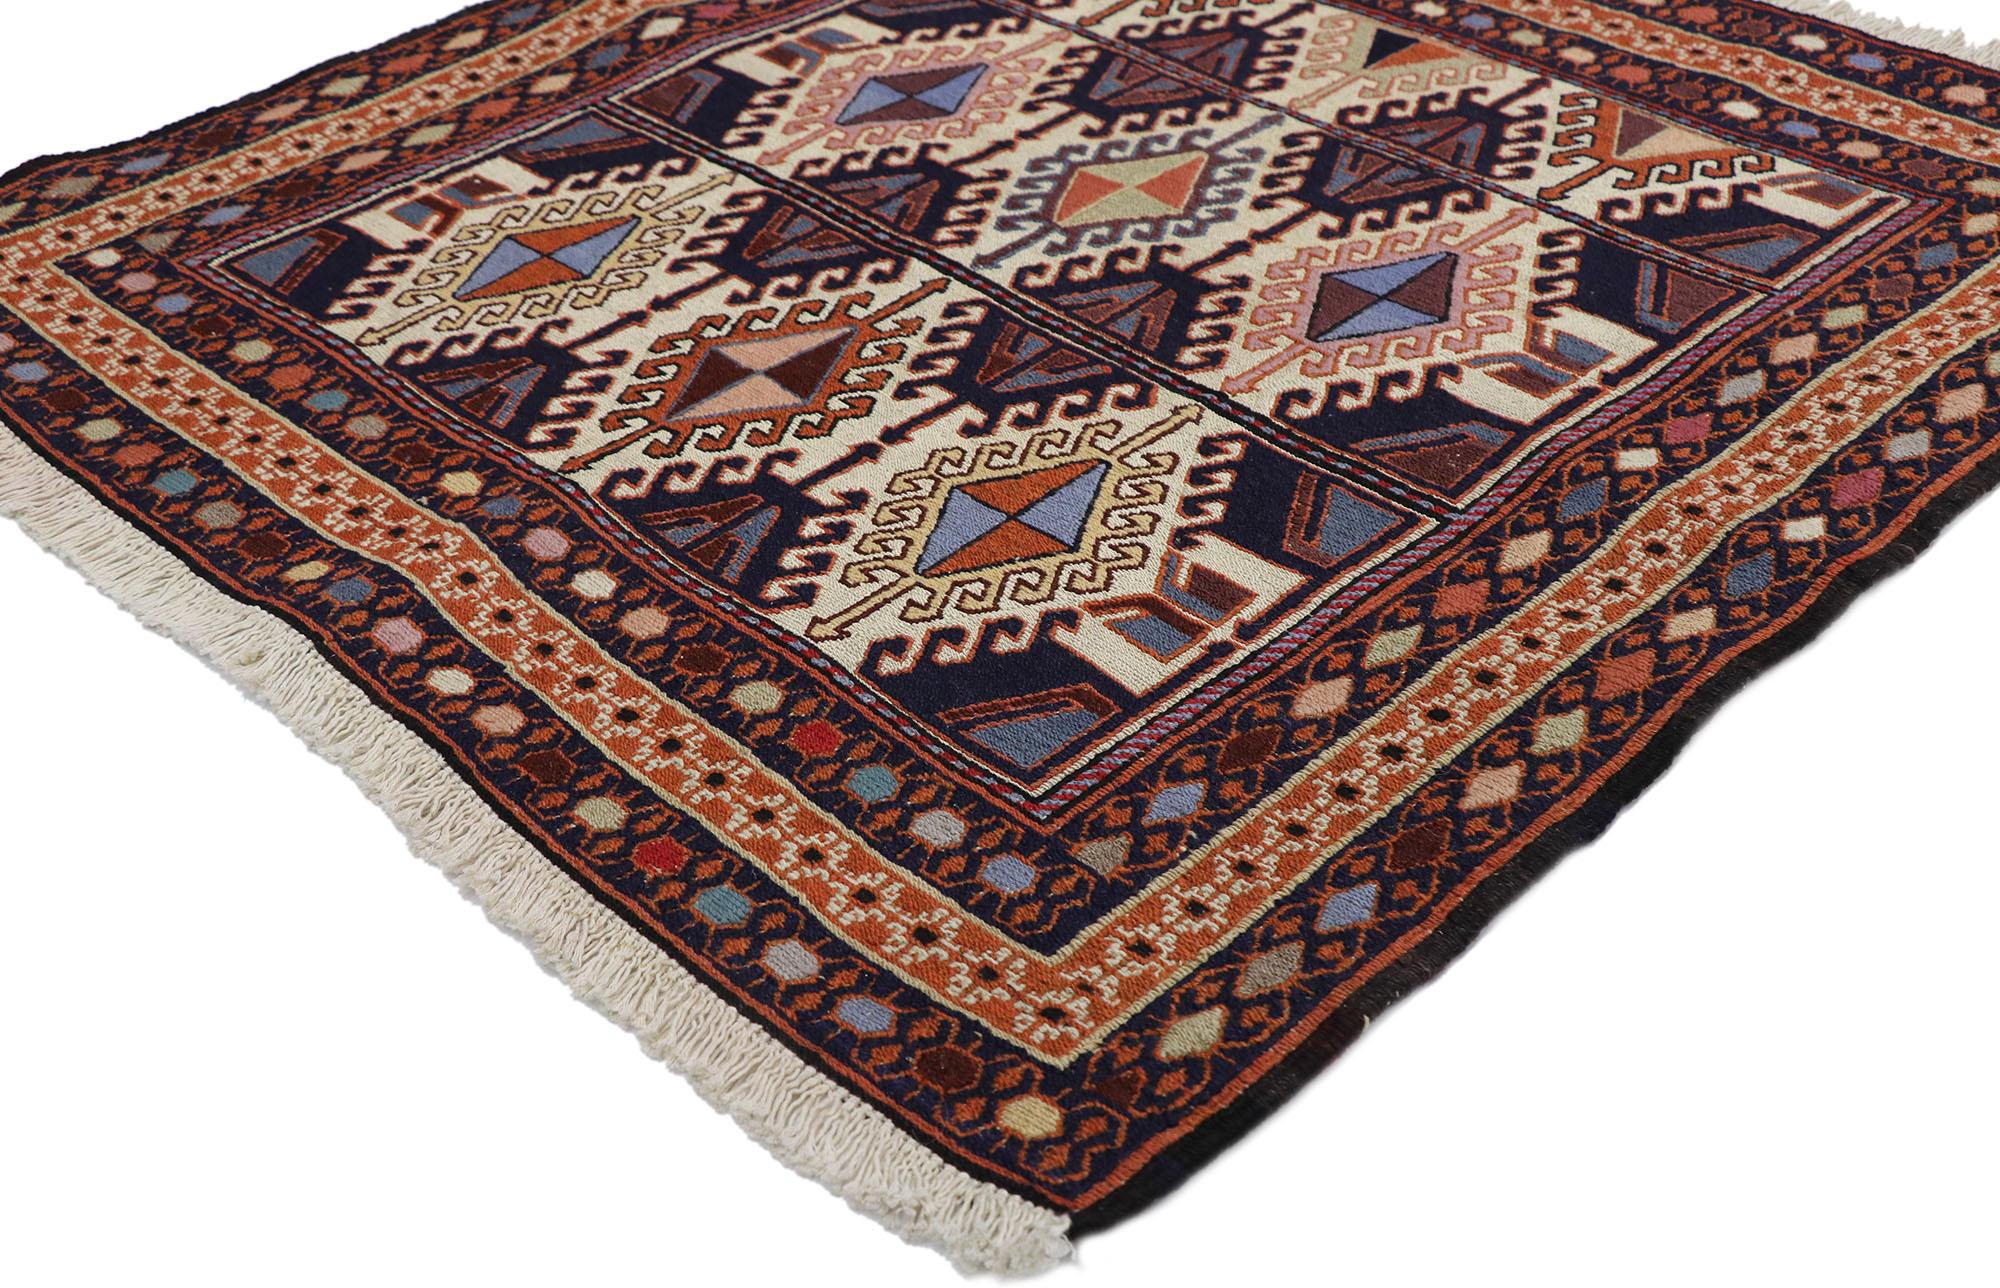 78039 vintage Persian Shiraz Kilim rug with Tribal style 02'11 x 03'01. Full of tiny details and a bold expressive design combined with vibrant colors and tribal style, this hand-woven wool vintage Persian Shiraz kilim rug is a captivating vision of